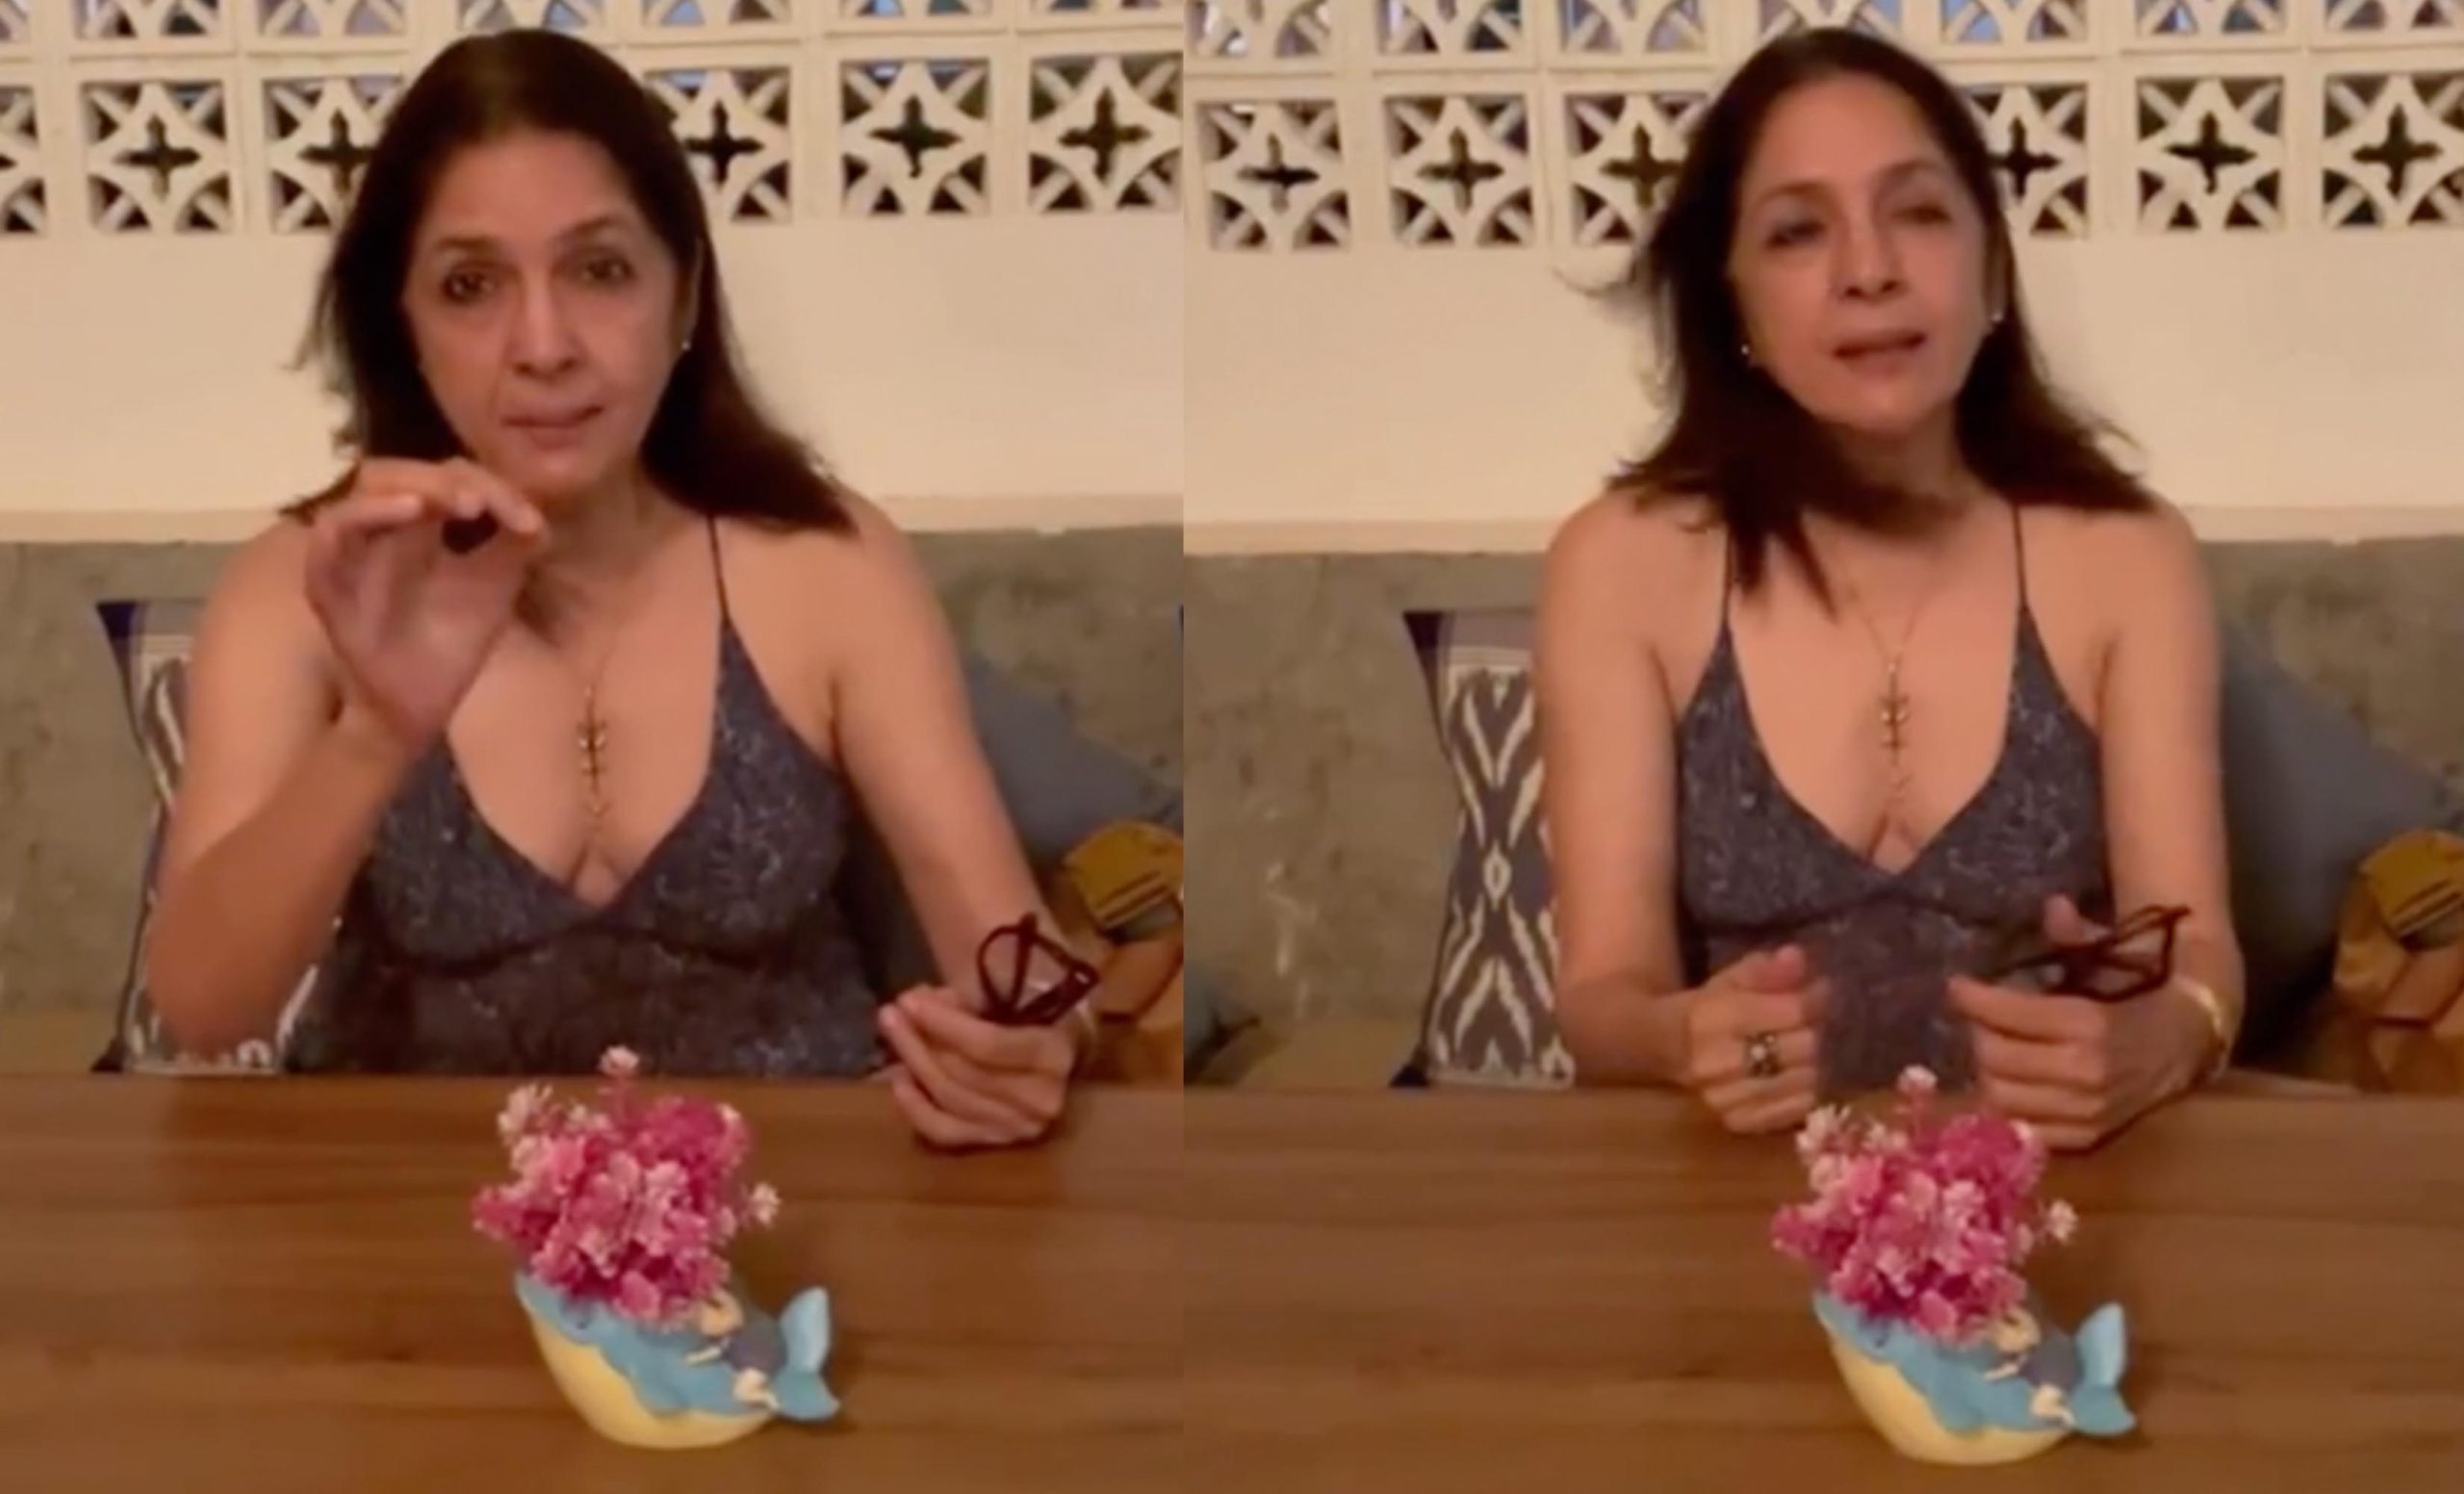 Neena Gupta Asks People To Not Judge Others Based On Clothes. Sach Kahun Toh, We Love These Videos She Makes!